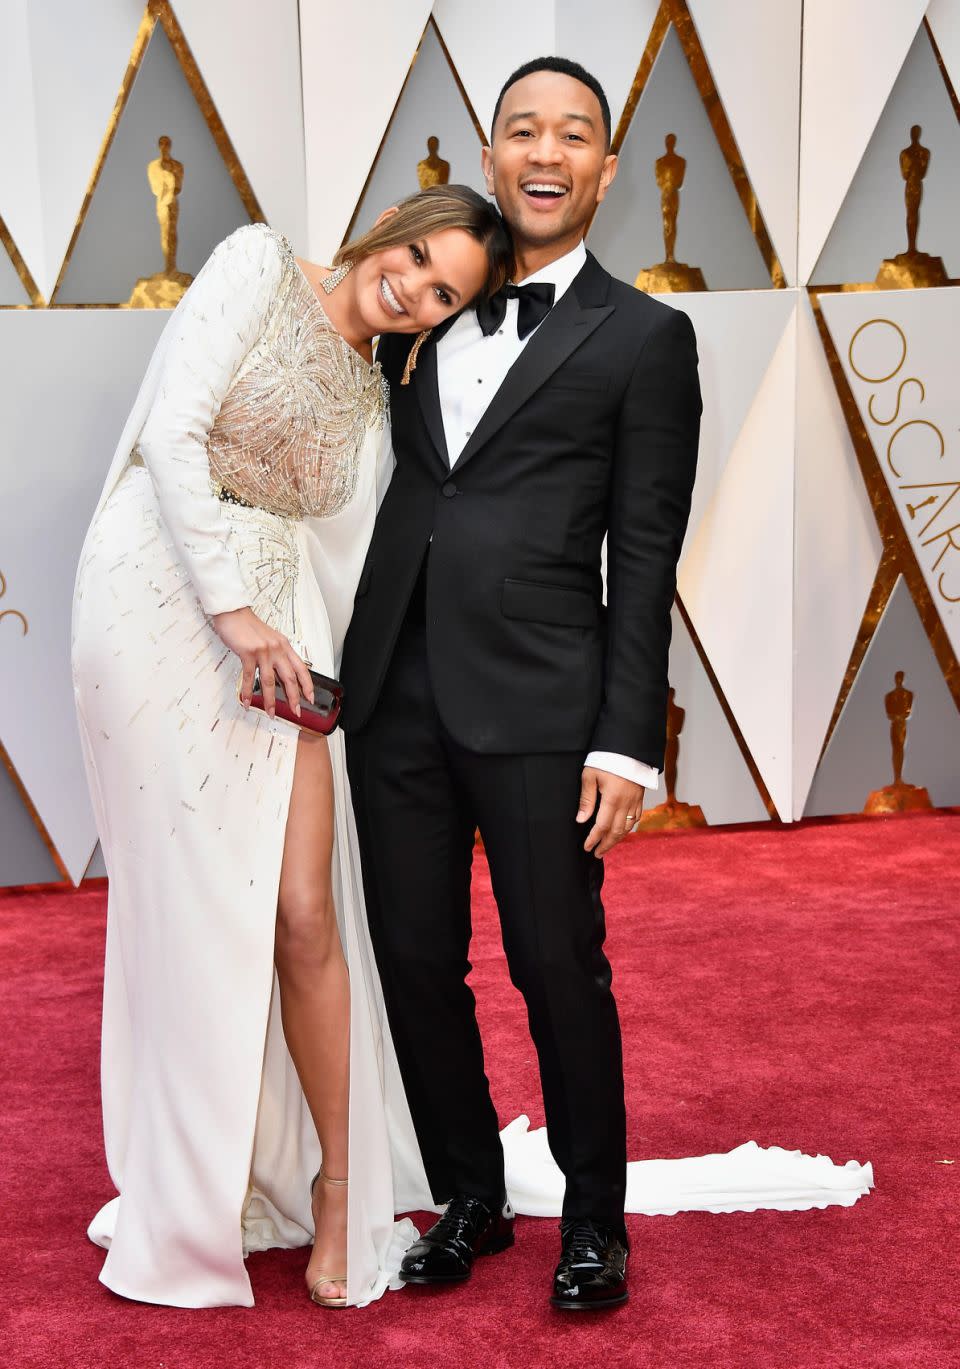 They epitomise #couplegoals in Hollywood, but even Chrissy Teigen and John Legend have had a rocky patch in their relationship, leading to the decision to potentially split. Source: Getty